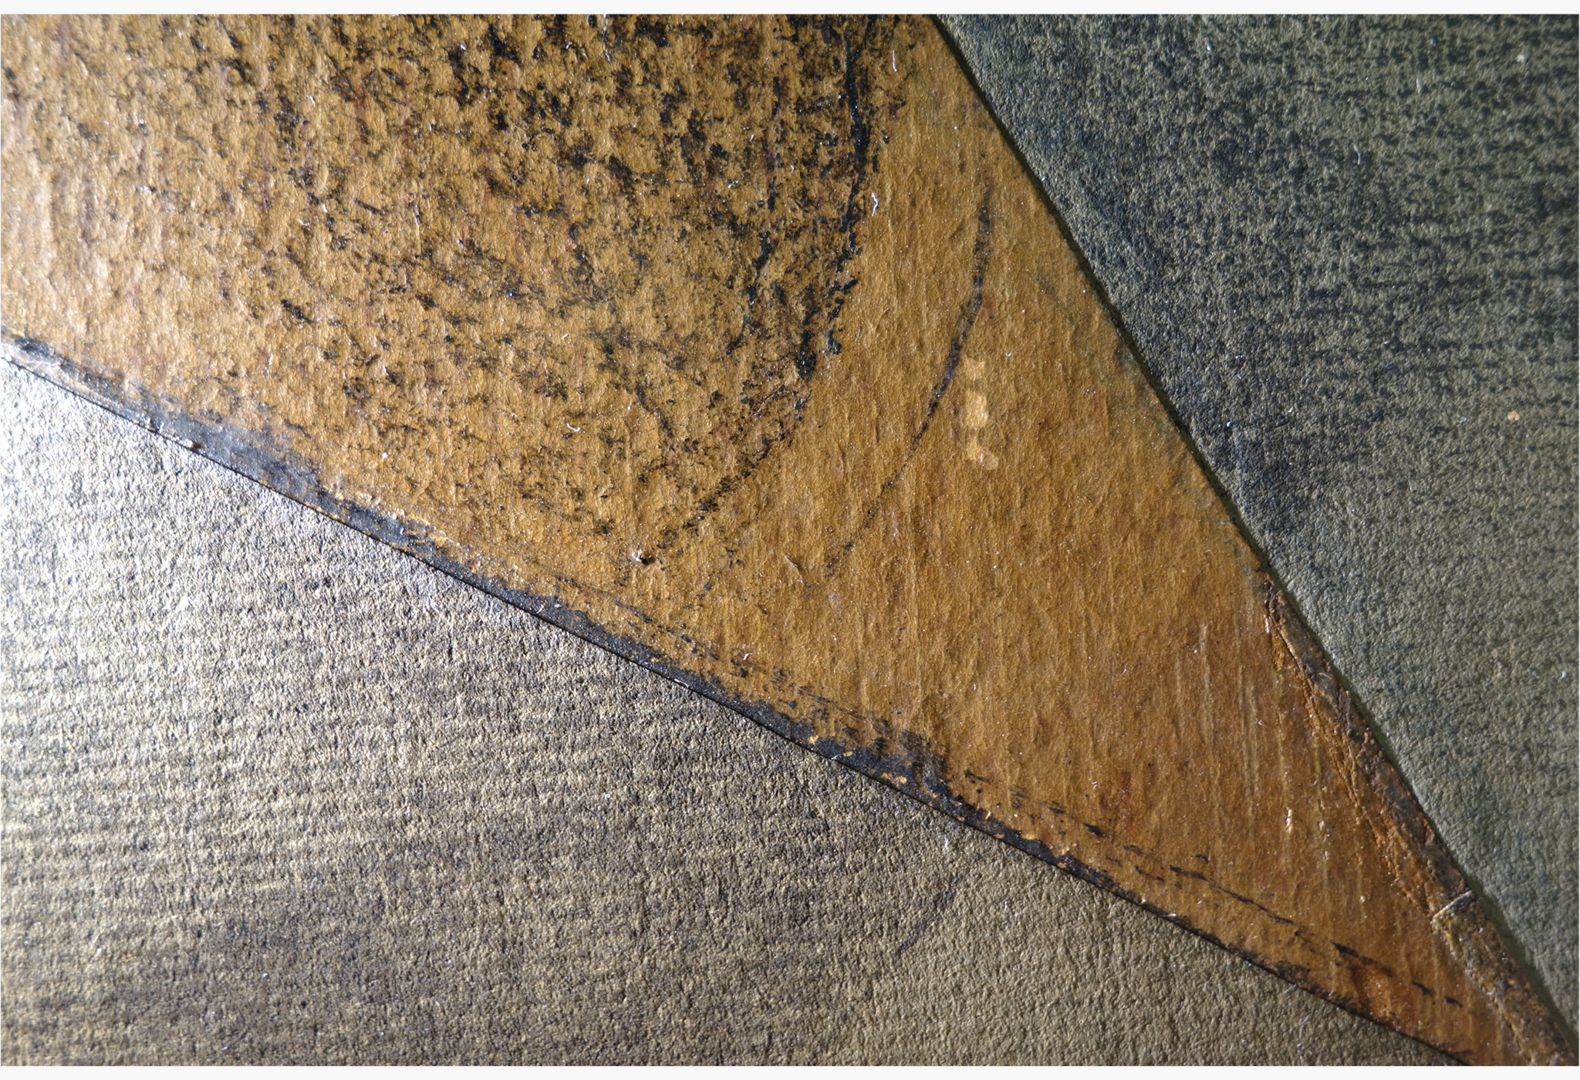 "Book and Glass" enlarged detail with a triangle of shaded brown paper showing the texture of black crayon against the papers